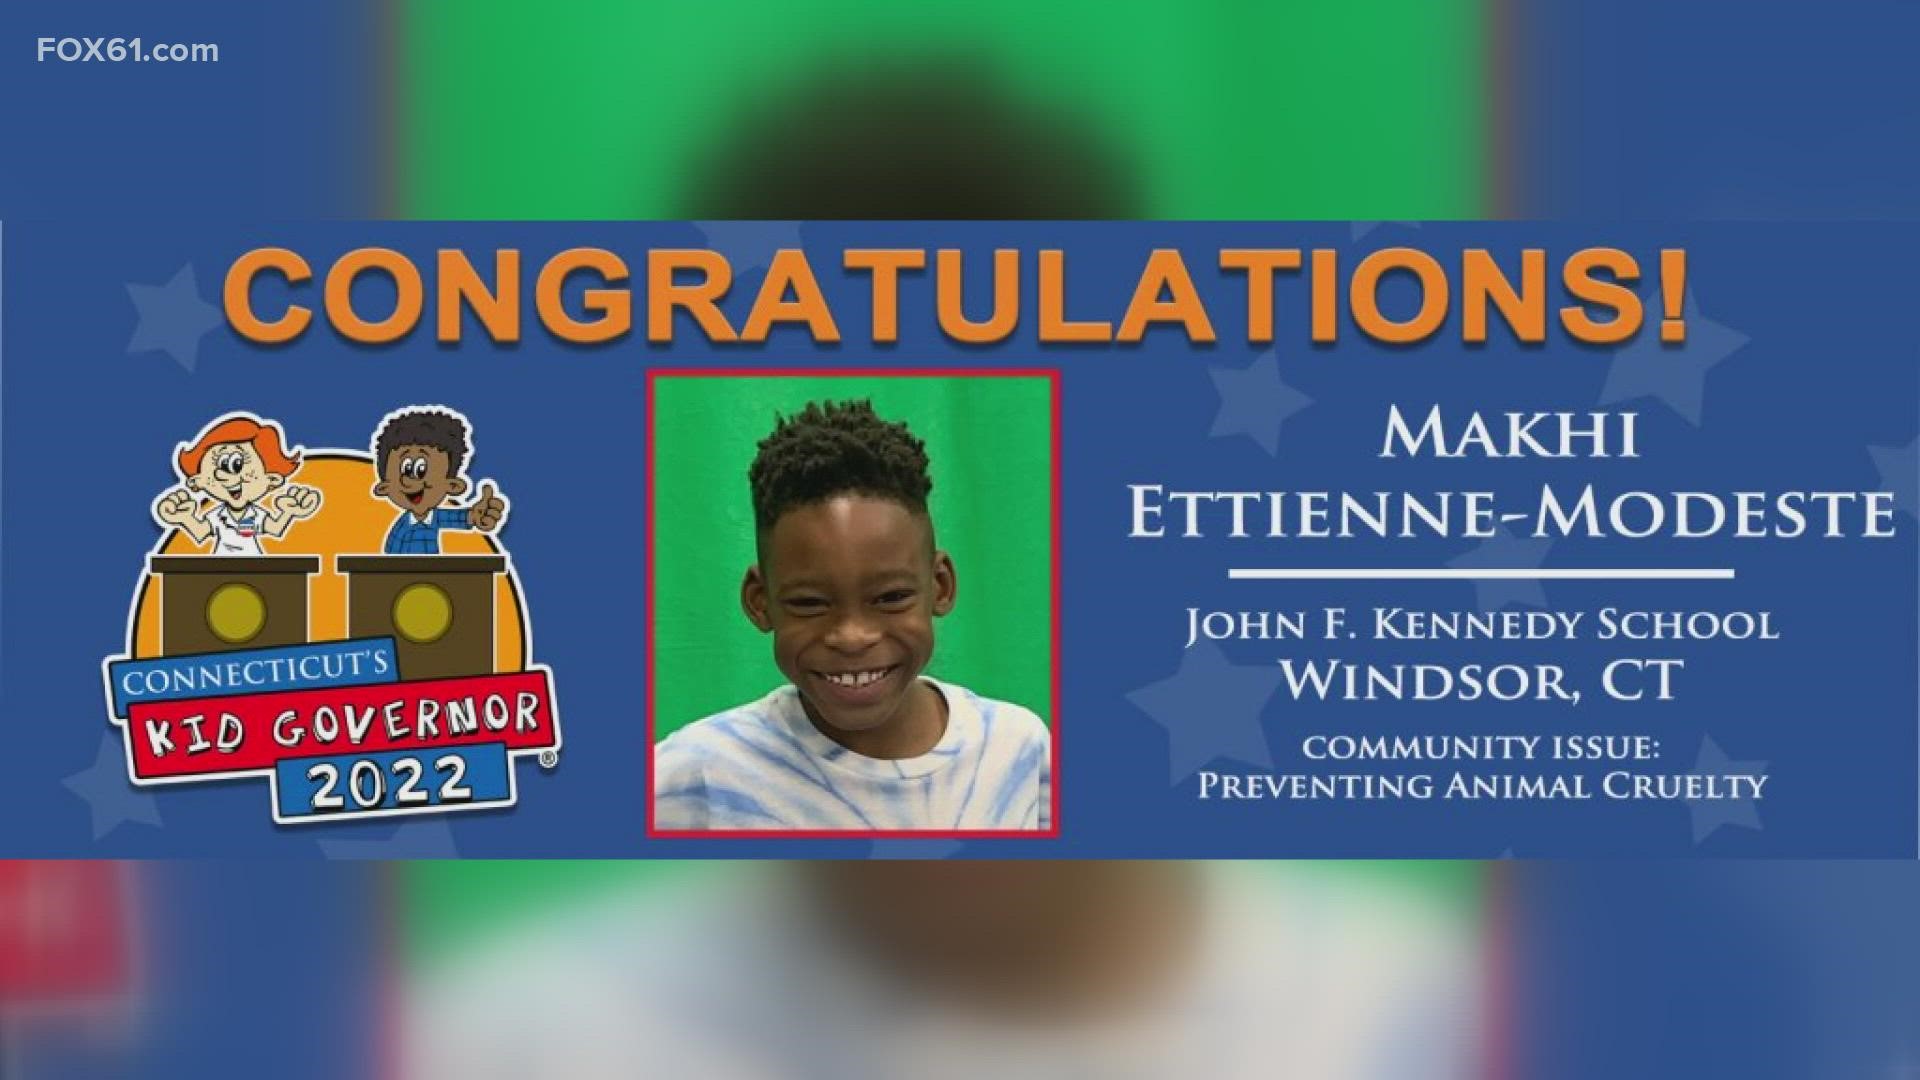 5th-grader Makhi Ettienne-Modeste was elected by his peers to serve as the 2022 Kid Governor.